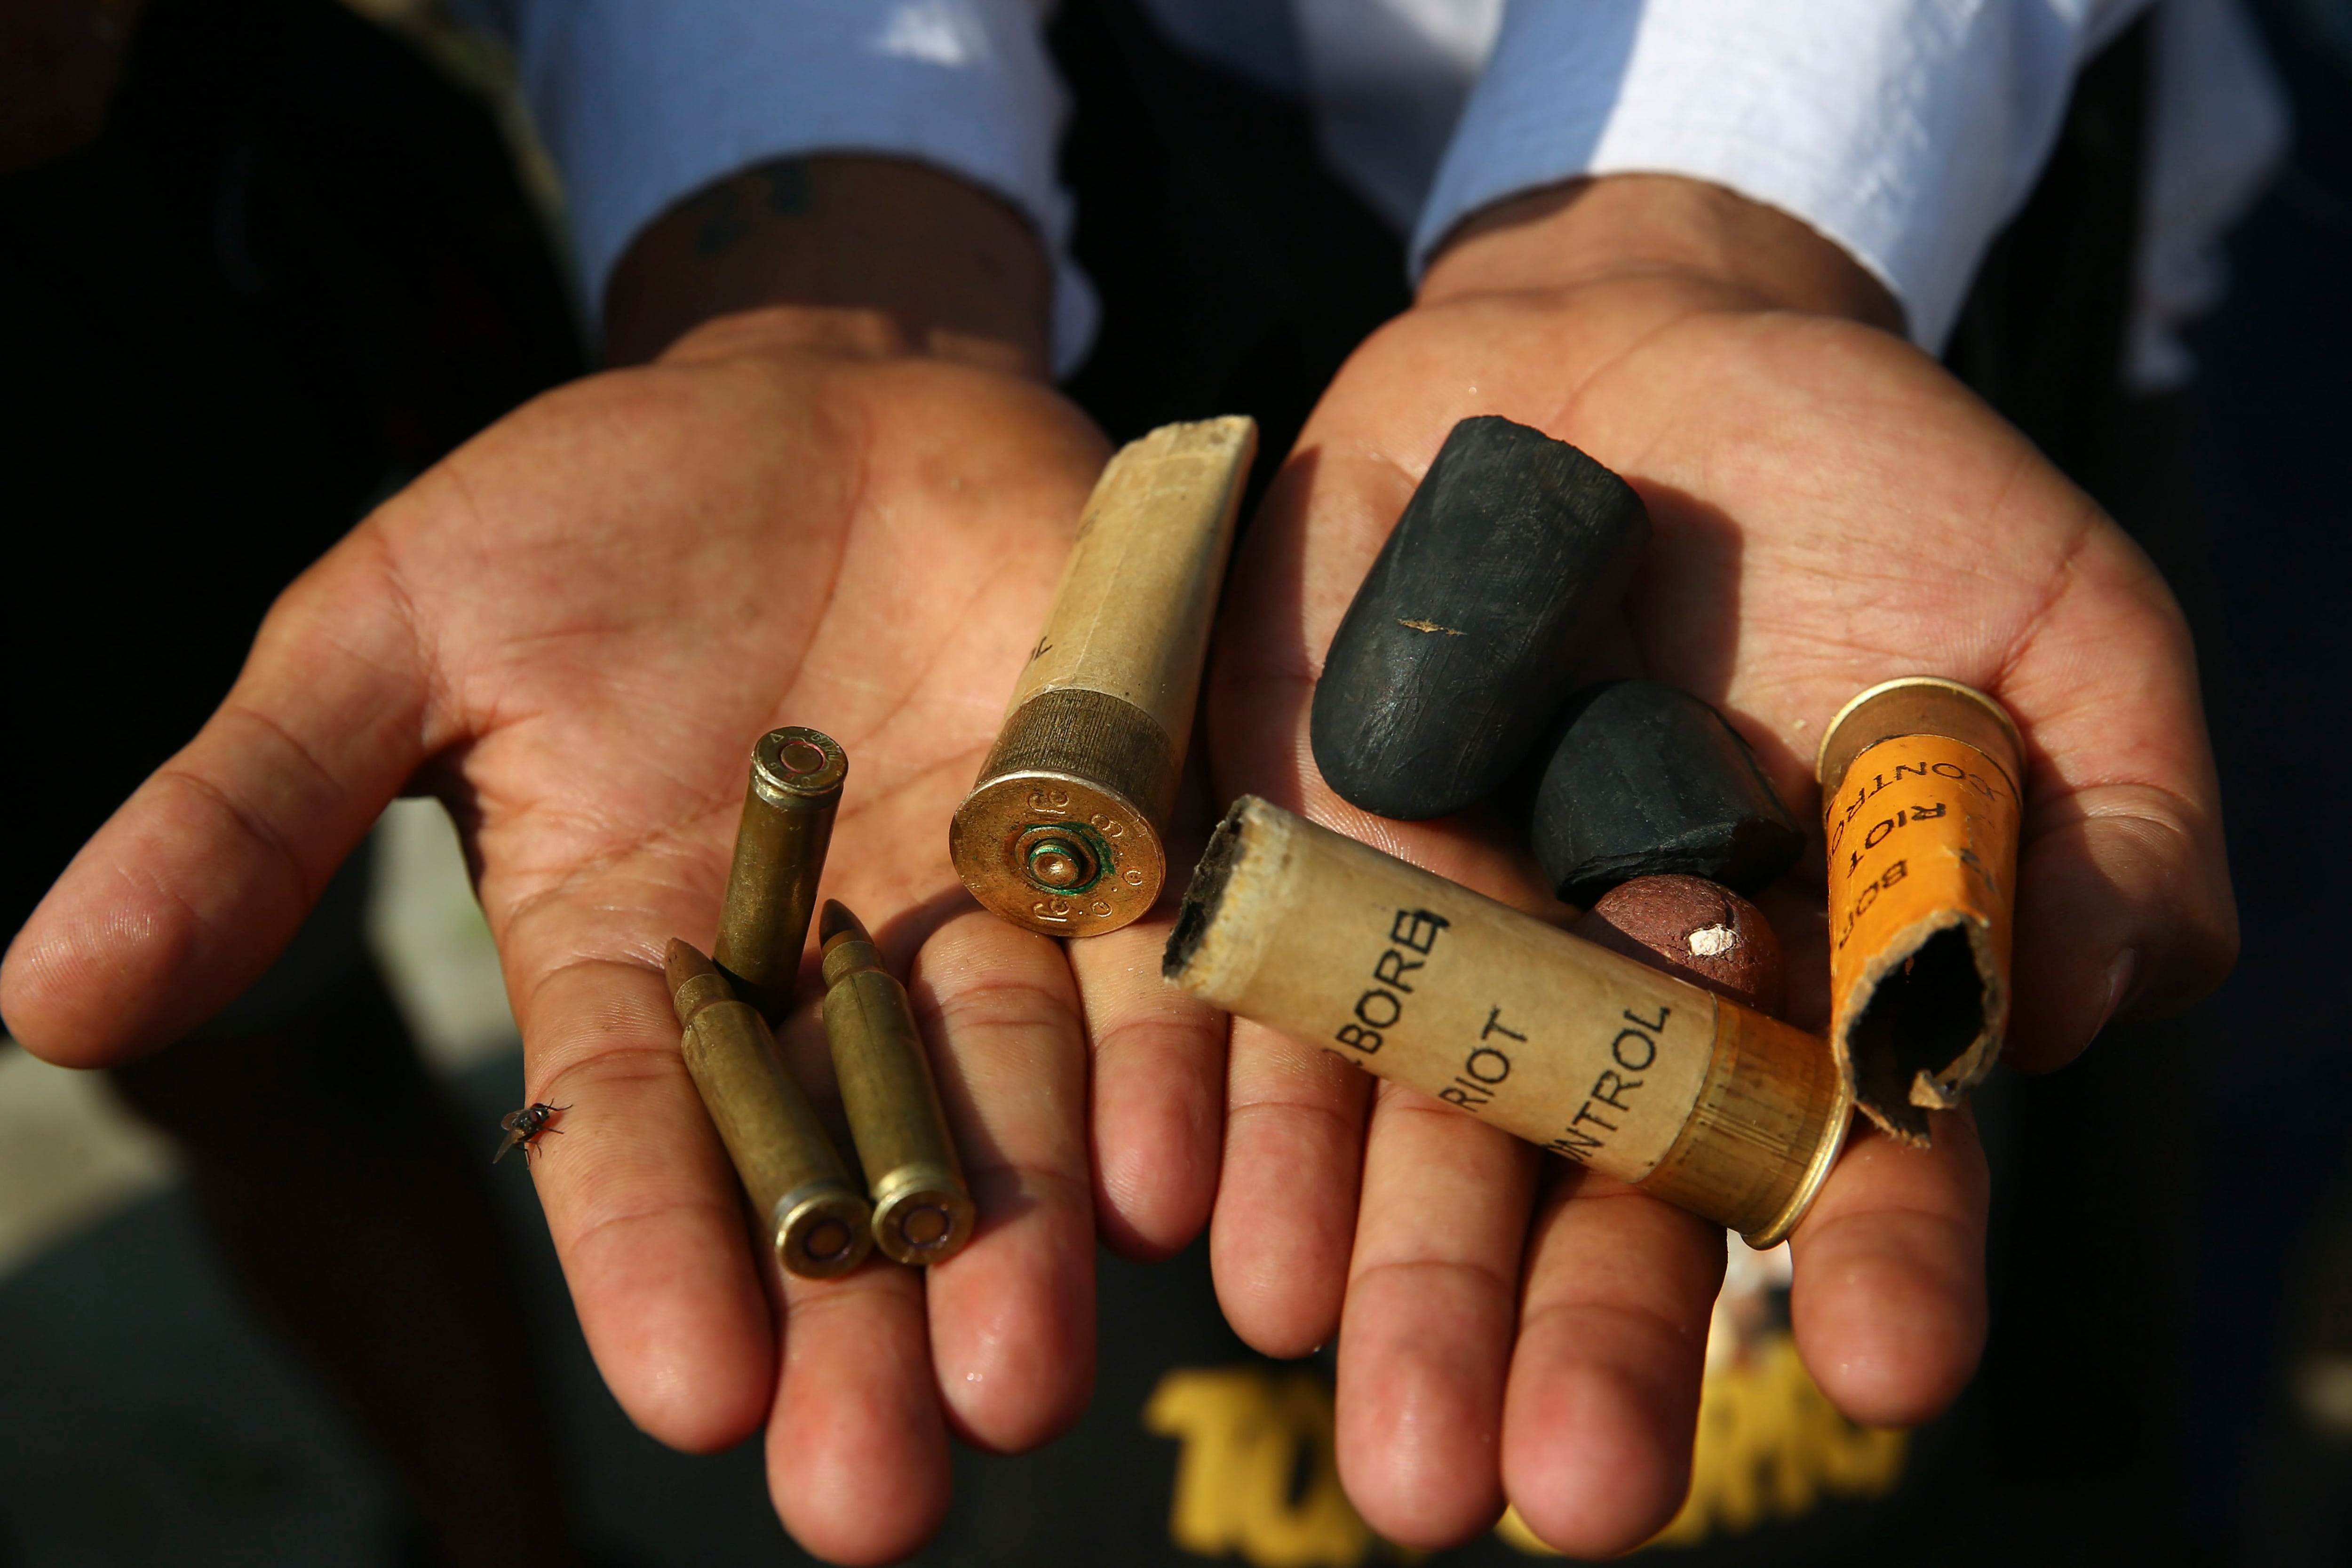 A protester show bullets, shotgun shells and rubber bullets used by security forces during a demonstration against the military coup in Mandalay, Myanmar, Friday, Feb. 26, 2021. In the month since Feb. 1 coup, the mass protests occurring each day are a sharp reminder of the long and bloody struggle for democracy in a country where the military ruled directly for more than five decades. (AP Photo)